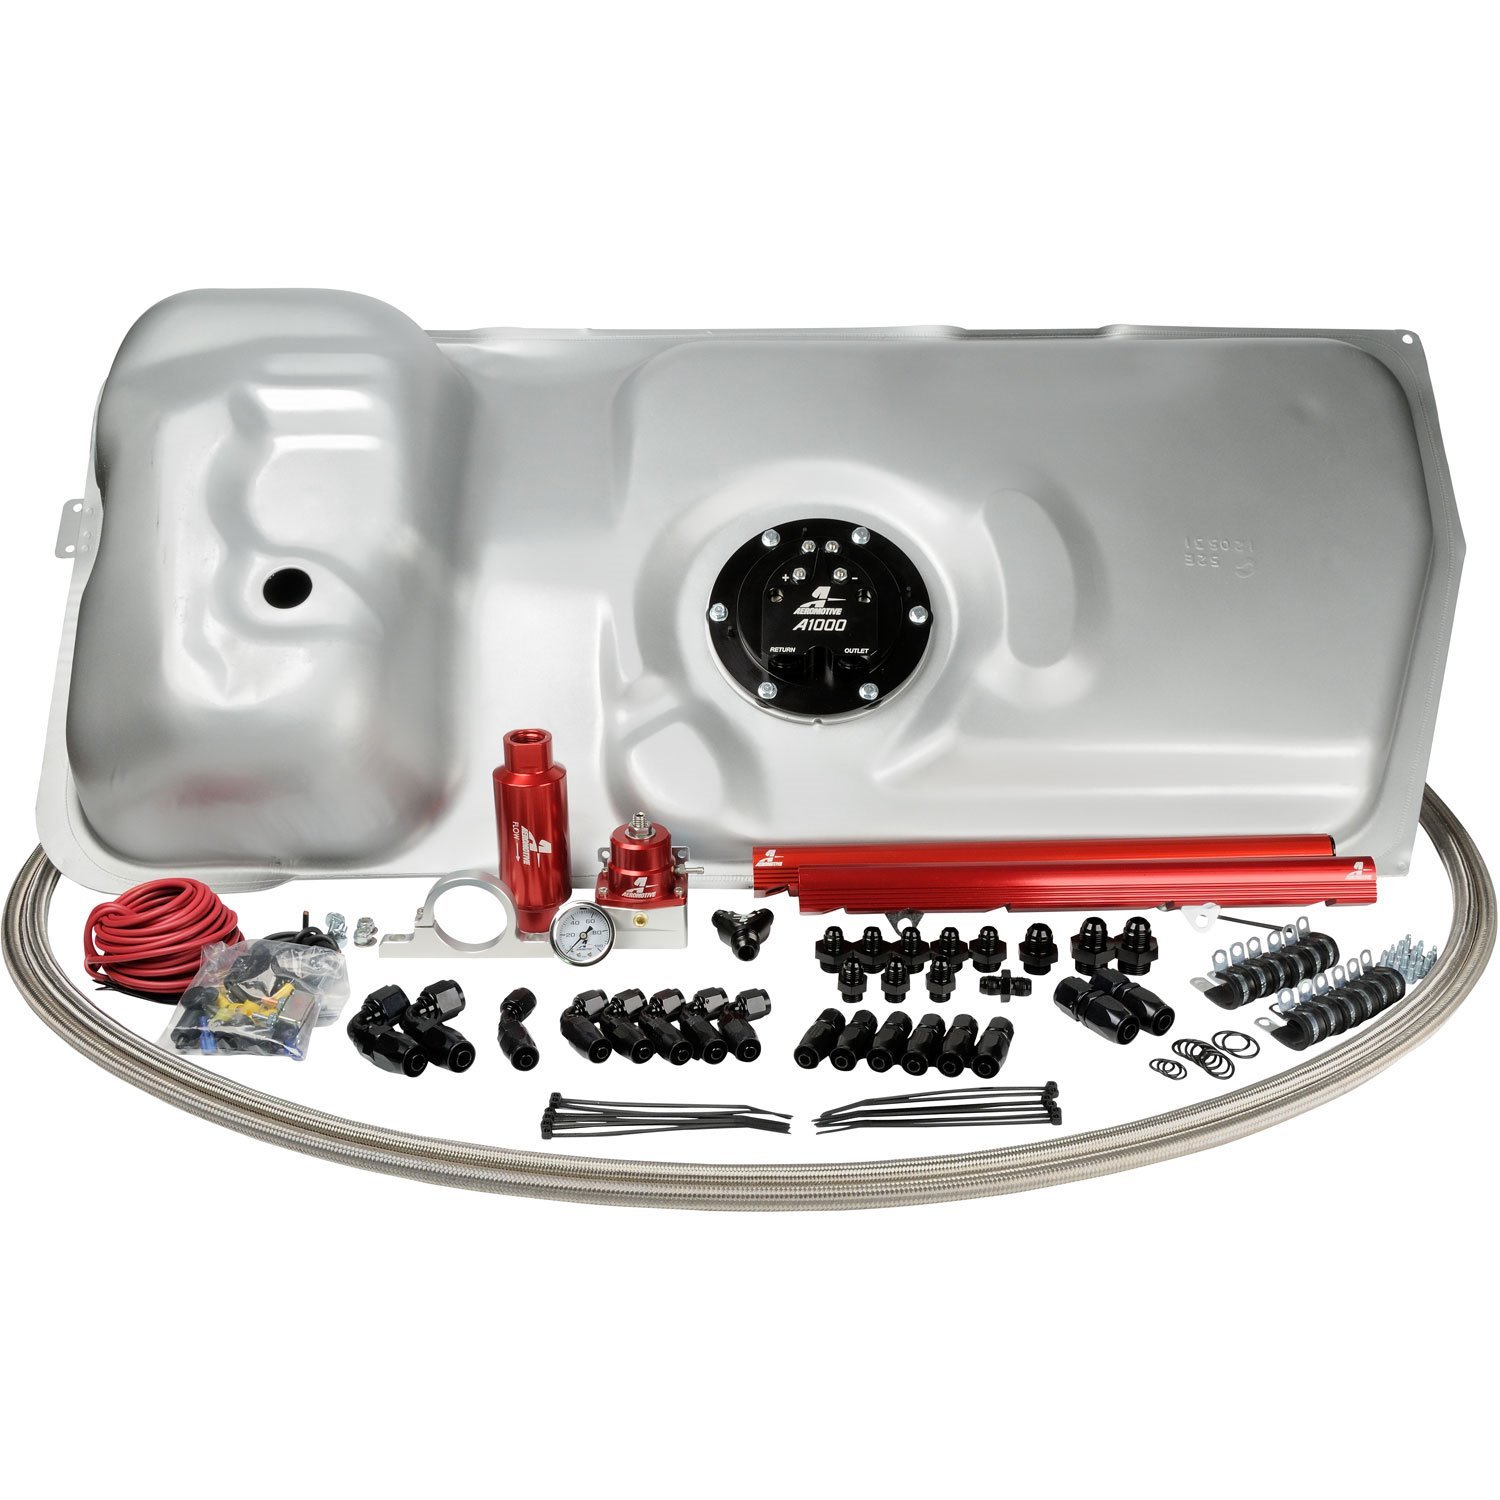 Complete Fuel Tank System with A1000 Fuel Pump